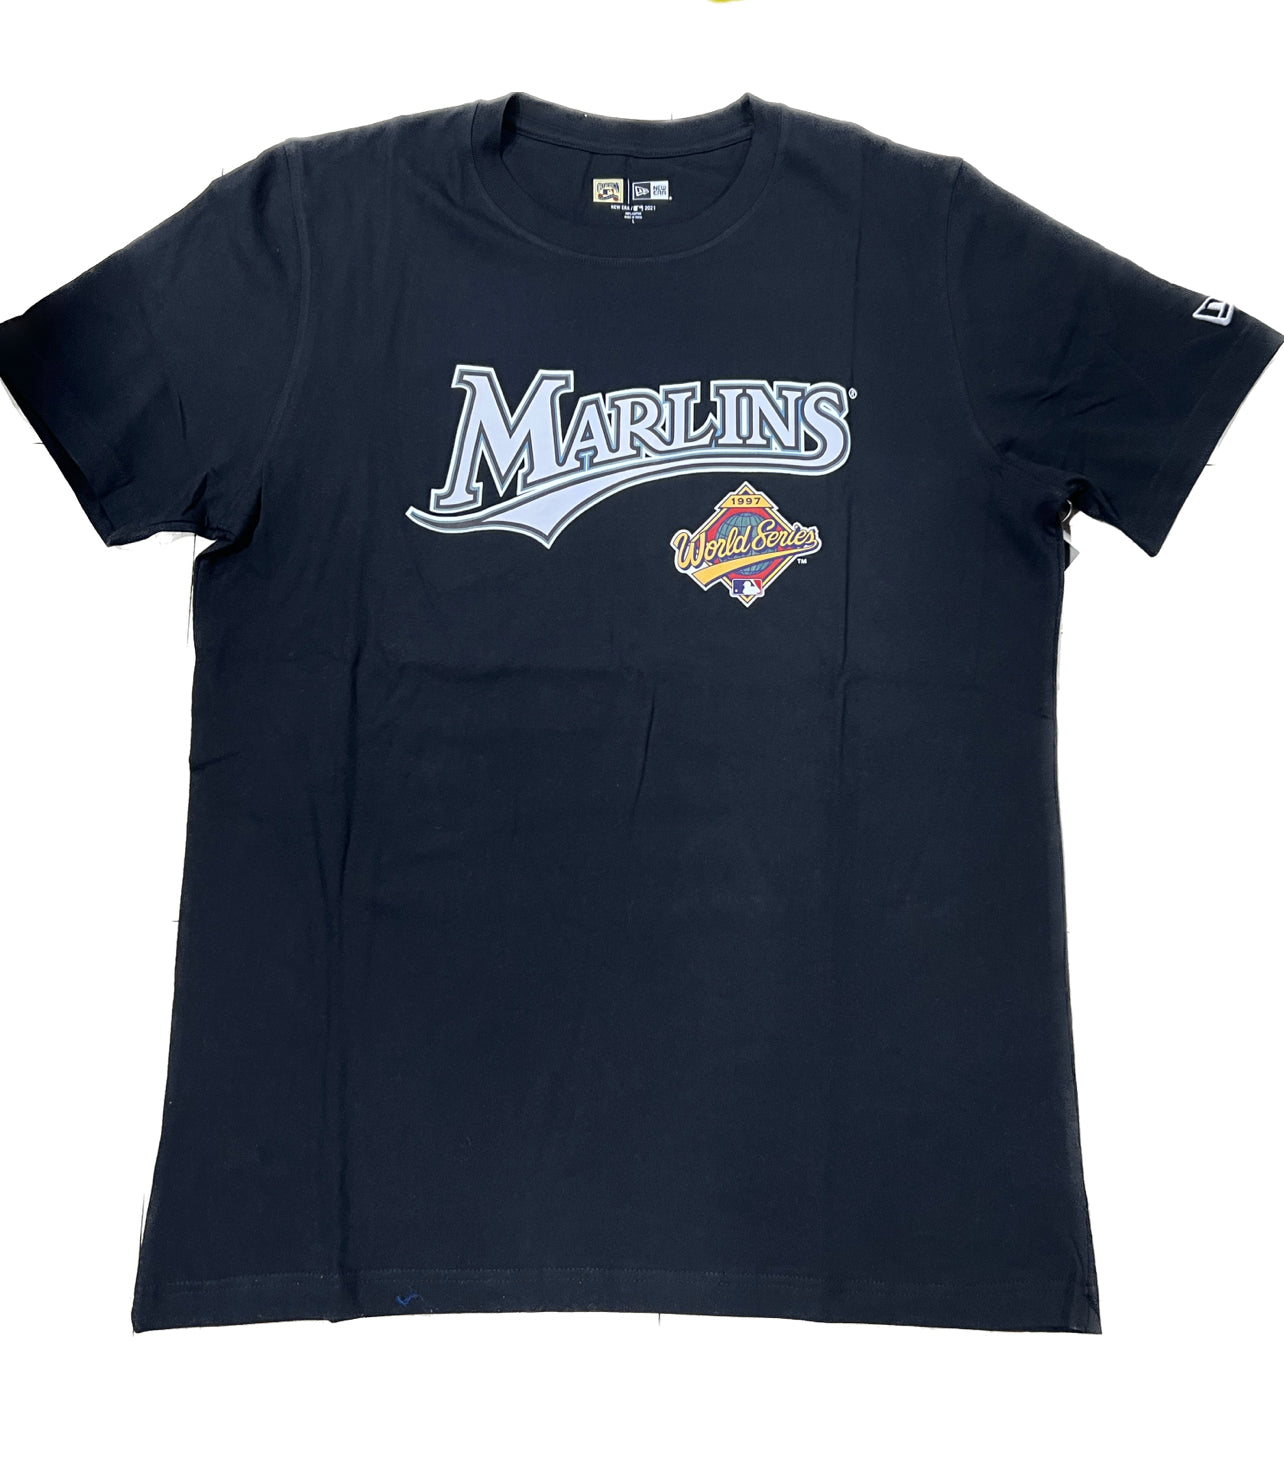 Miami Marlins Cooperstown Collection Florida Marlins 1997 World Series T-Shirt - Black